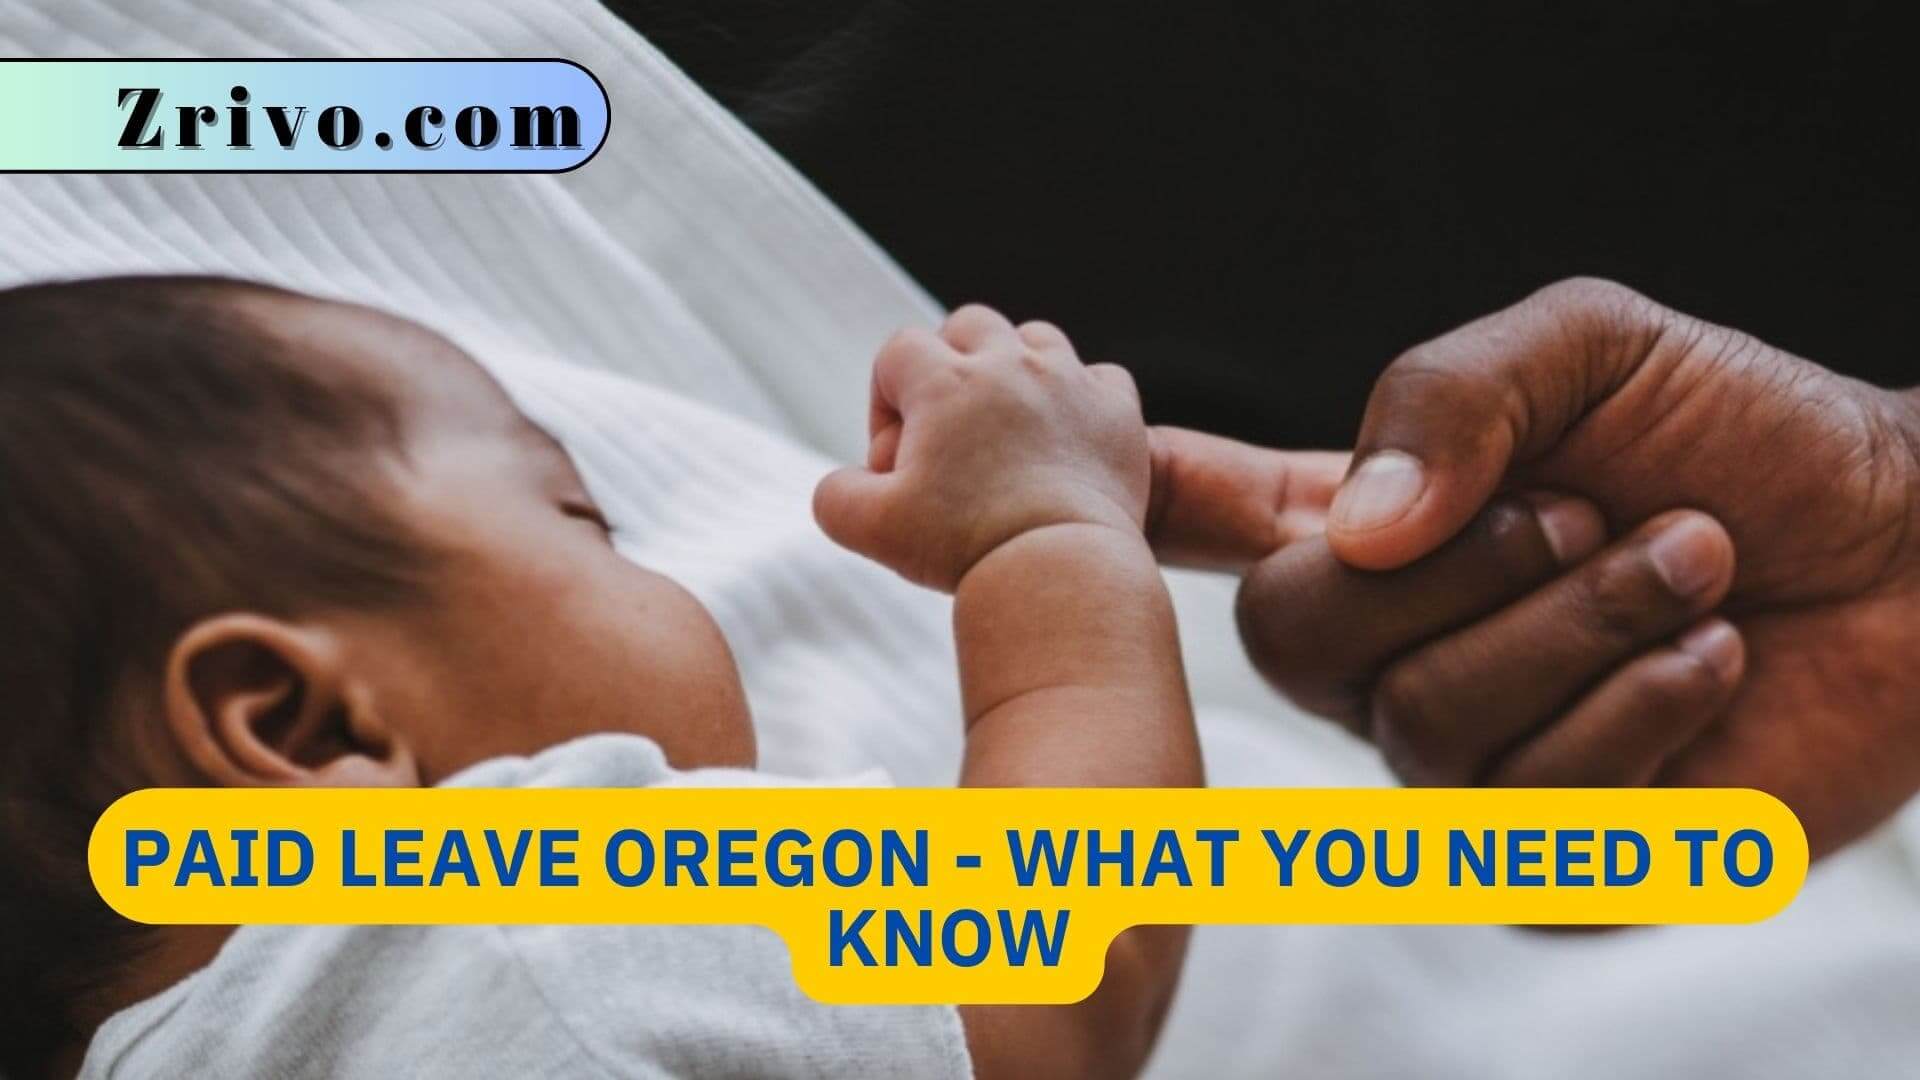 Paid Leave Oregon - What You Need to Know